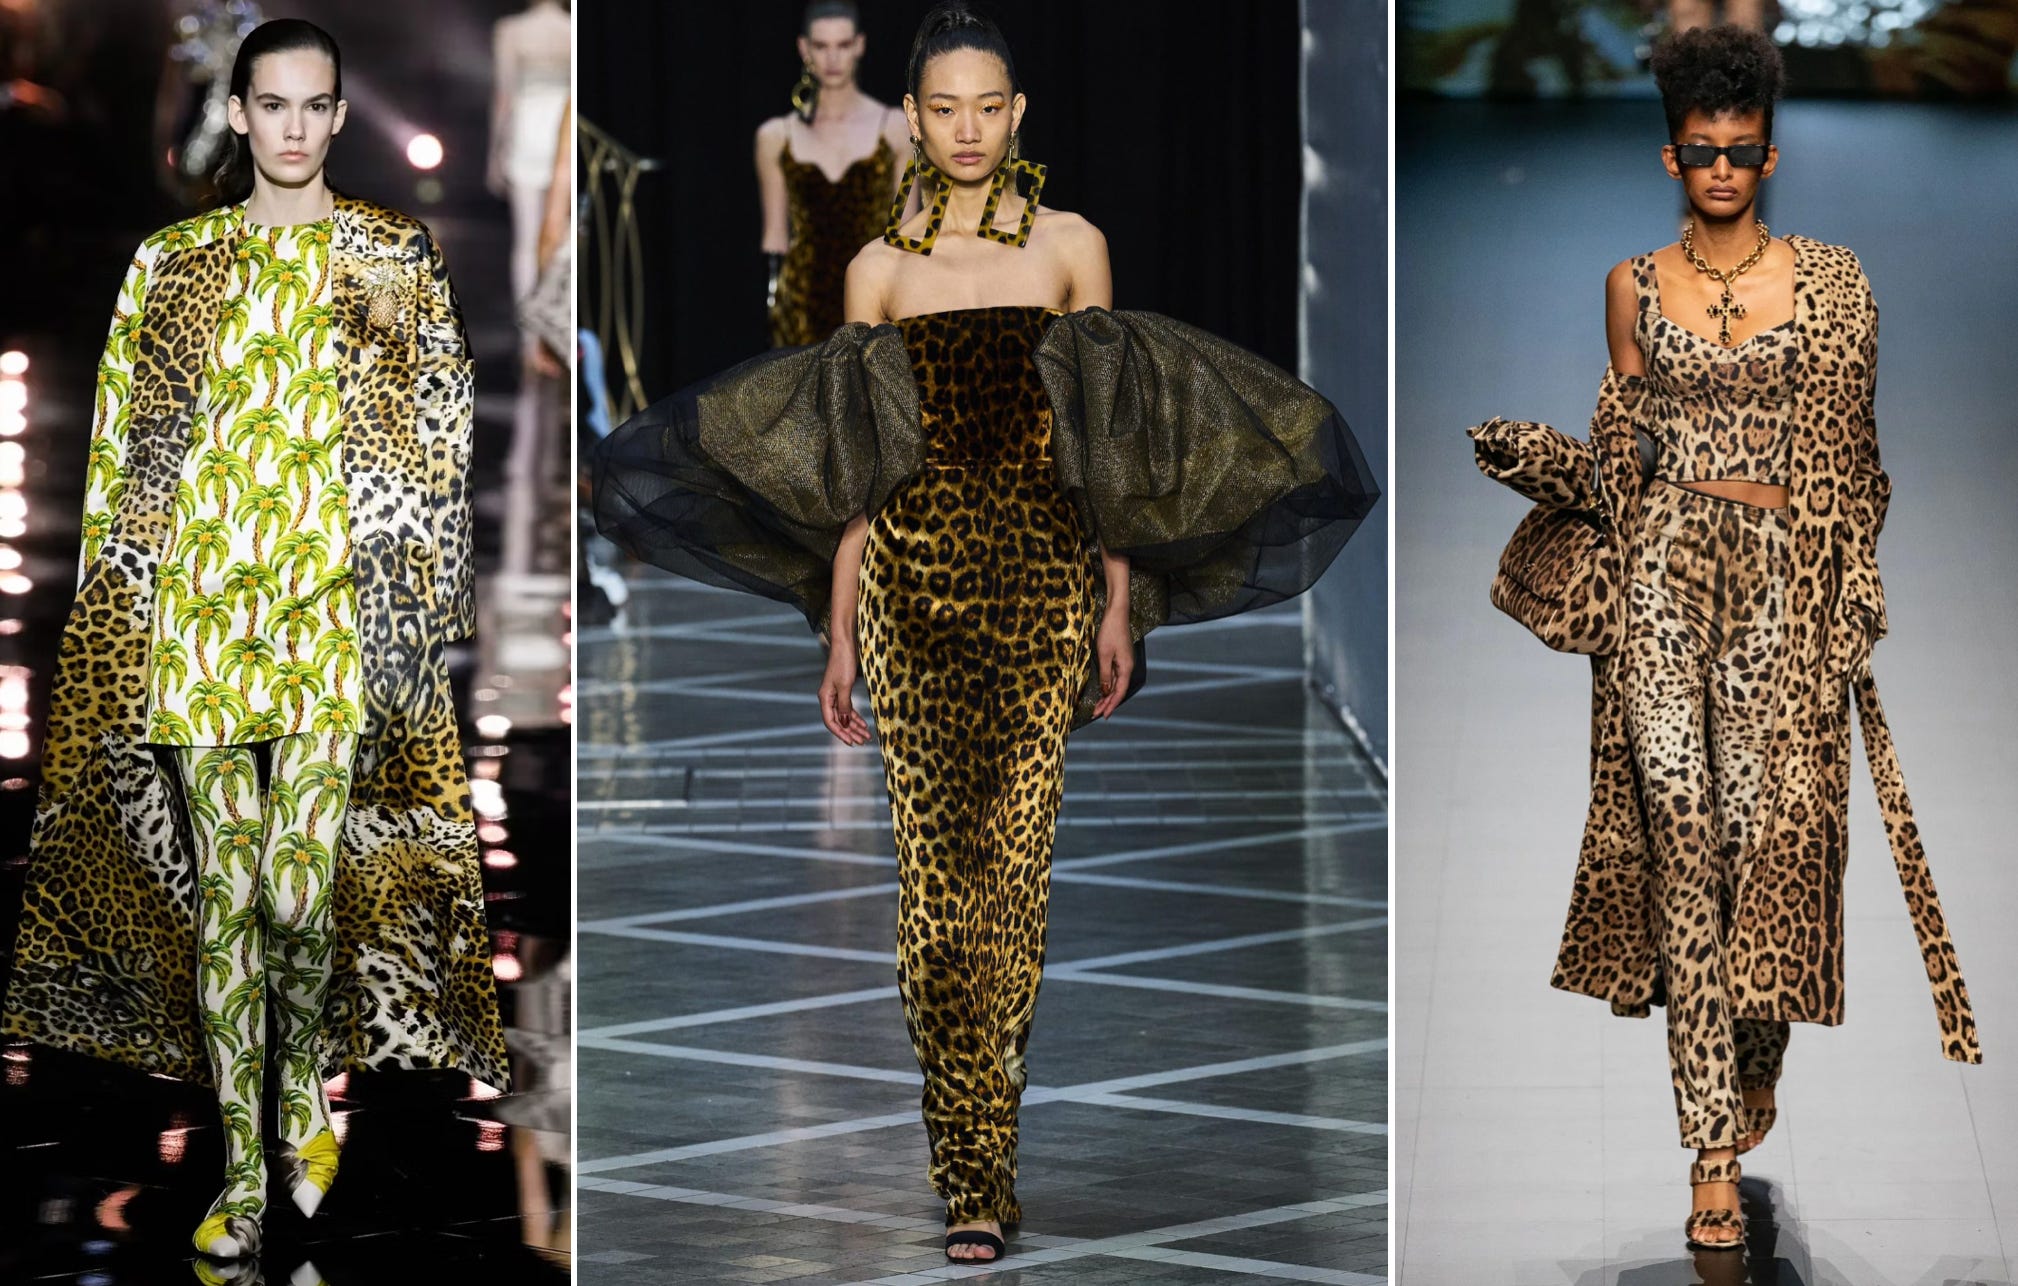 Leopard Print Trend: Fashion Week's Best Trend - A Glam Lifestyle